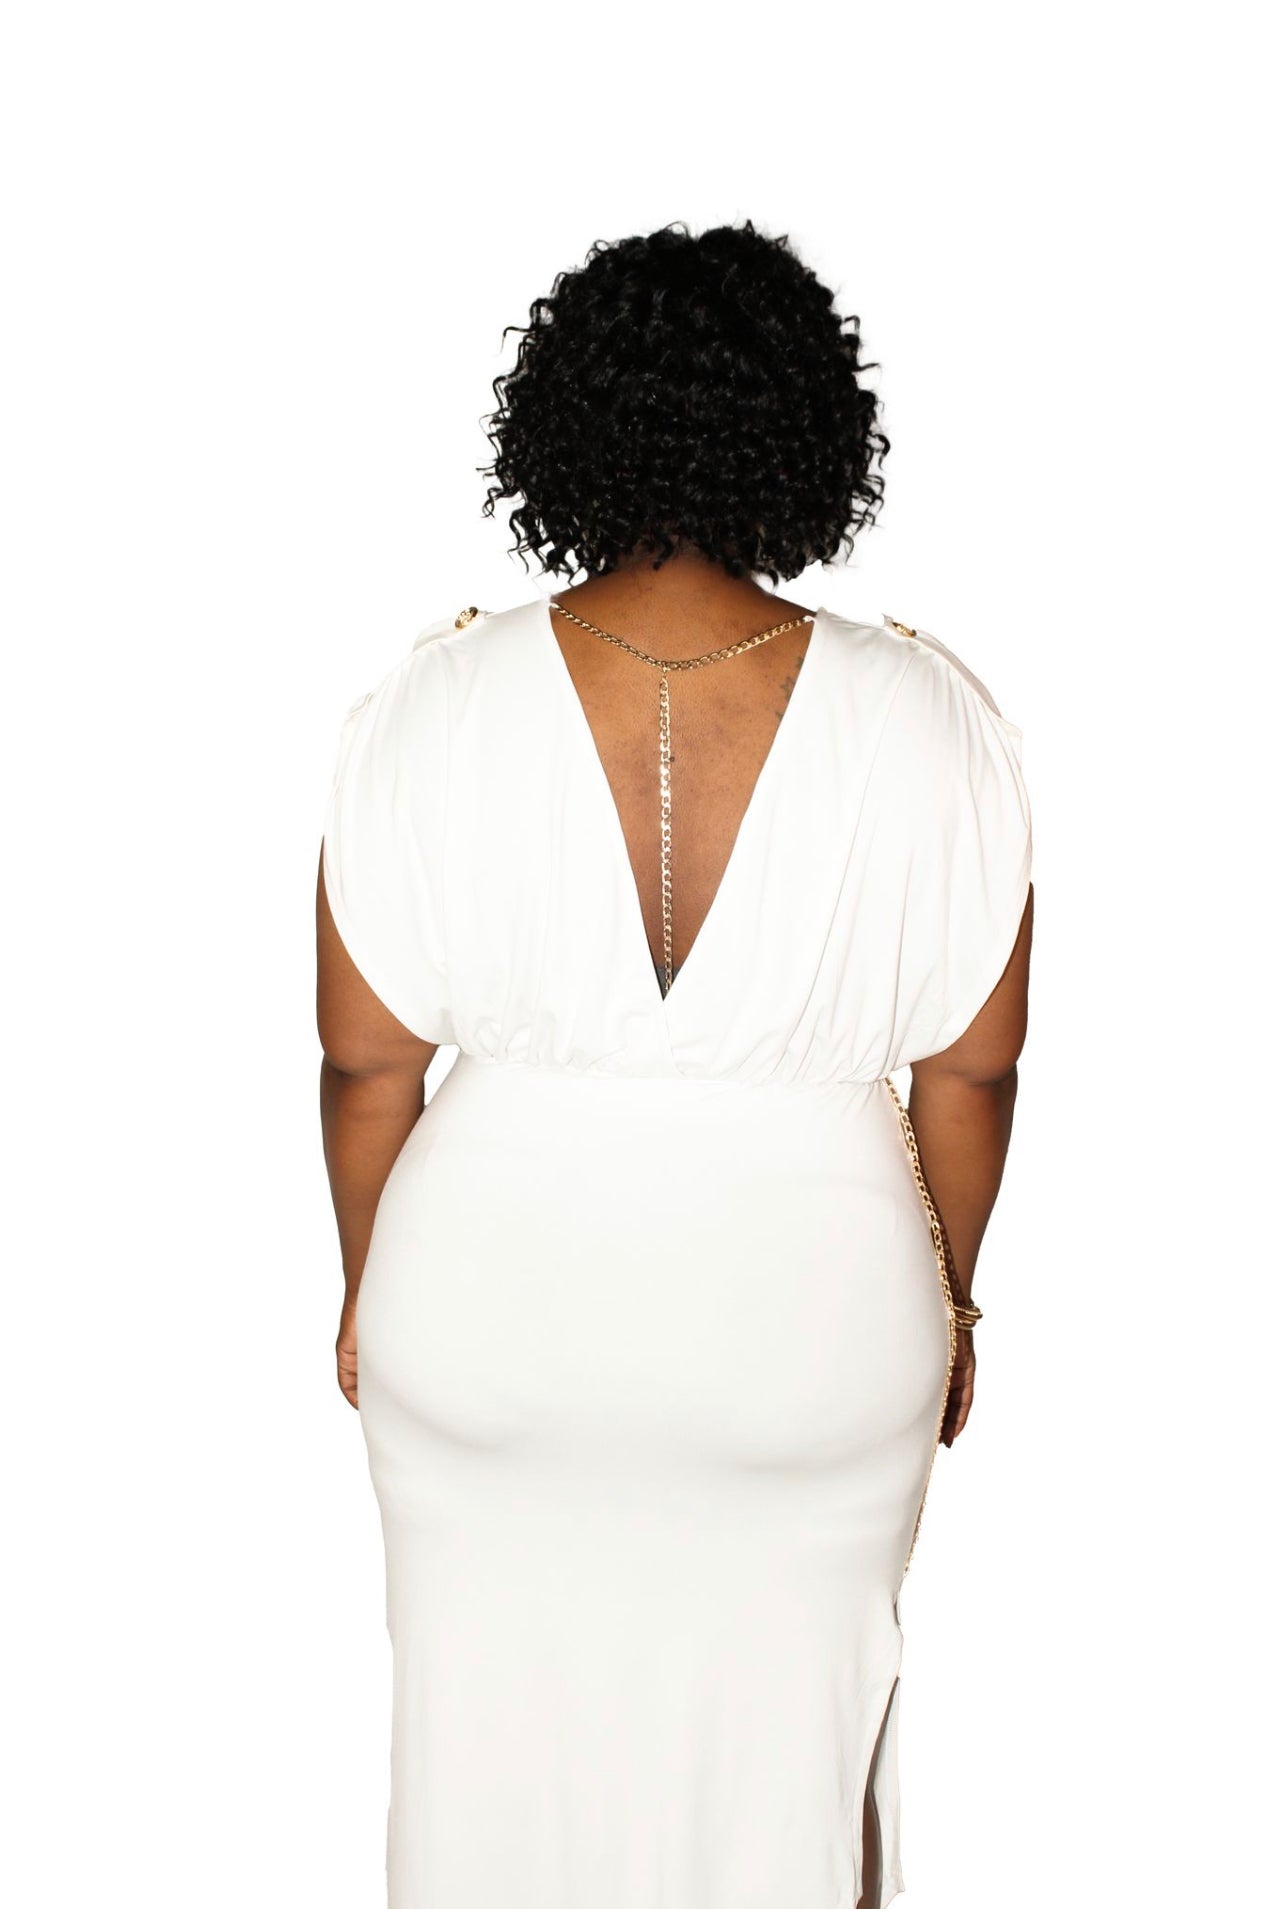 “Curvascious” Curvy Chained Dress